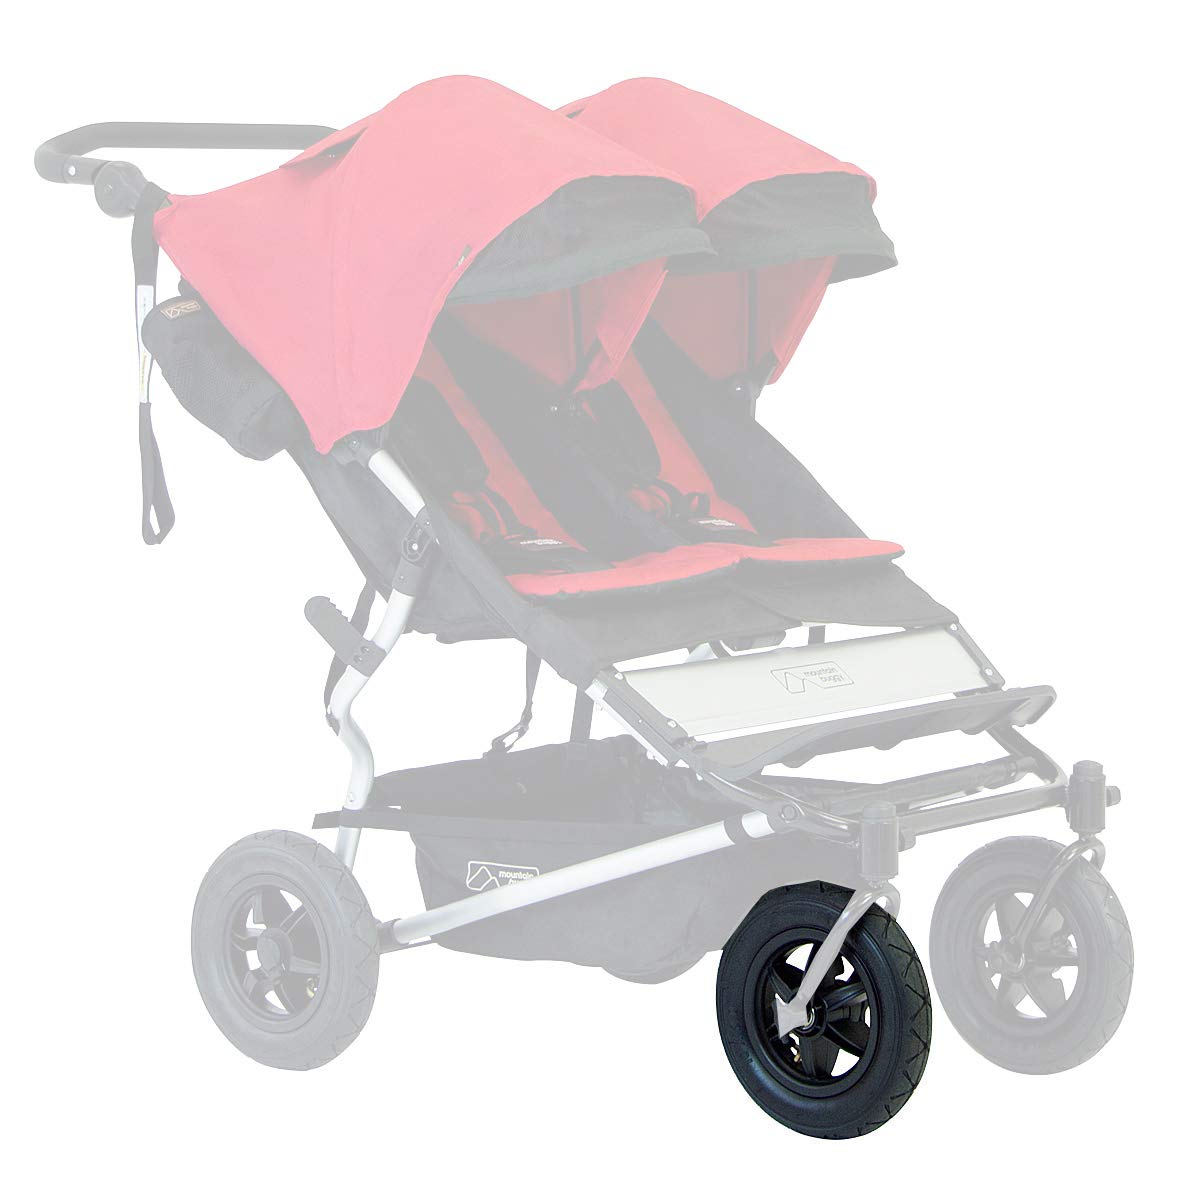 Mountain Buggy 10" Complete Front Wheel, Tire, + Tube for 2015 - 2017 V2.5 Duet Strollers